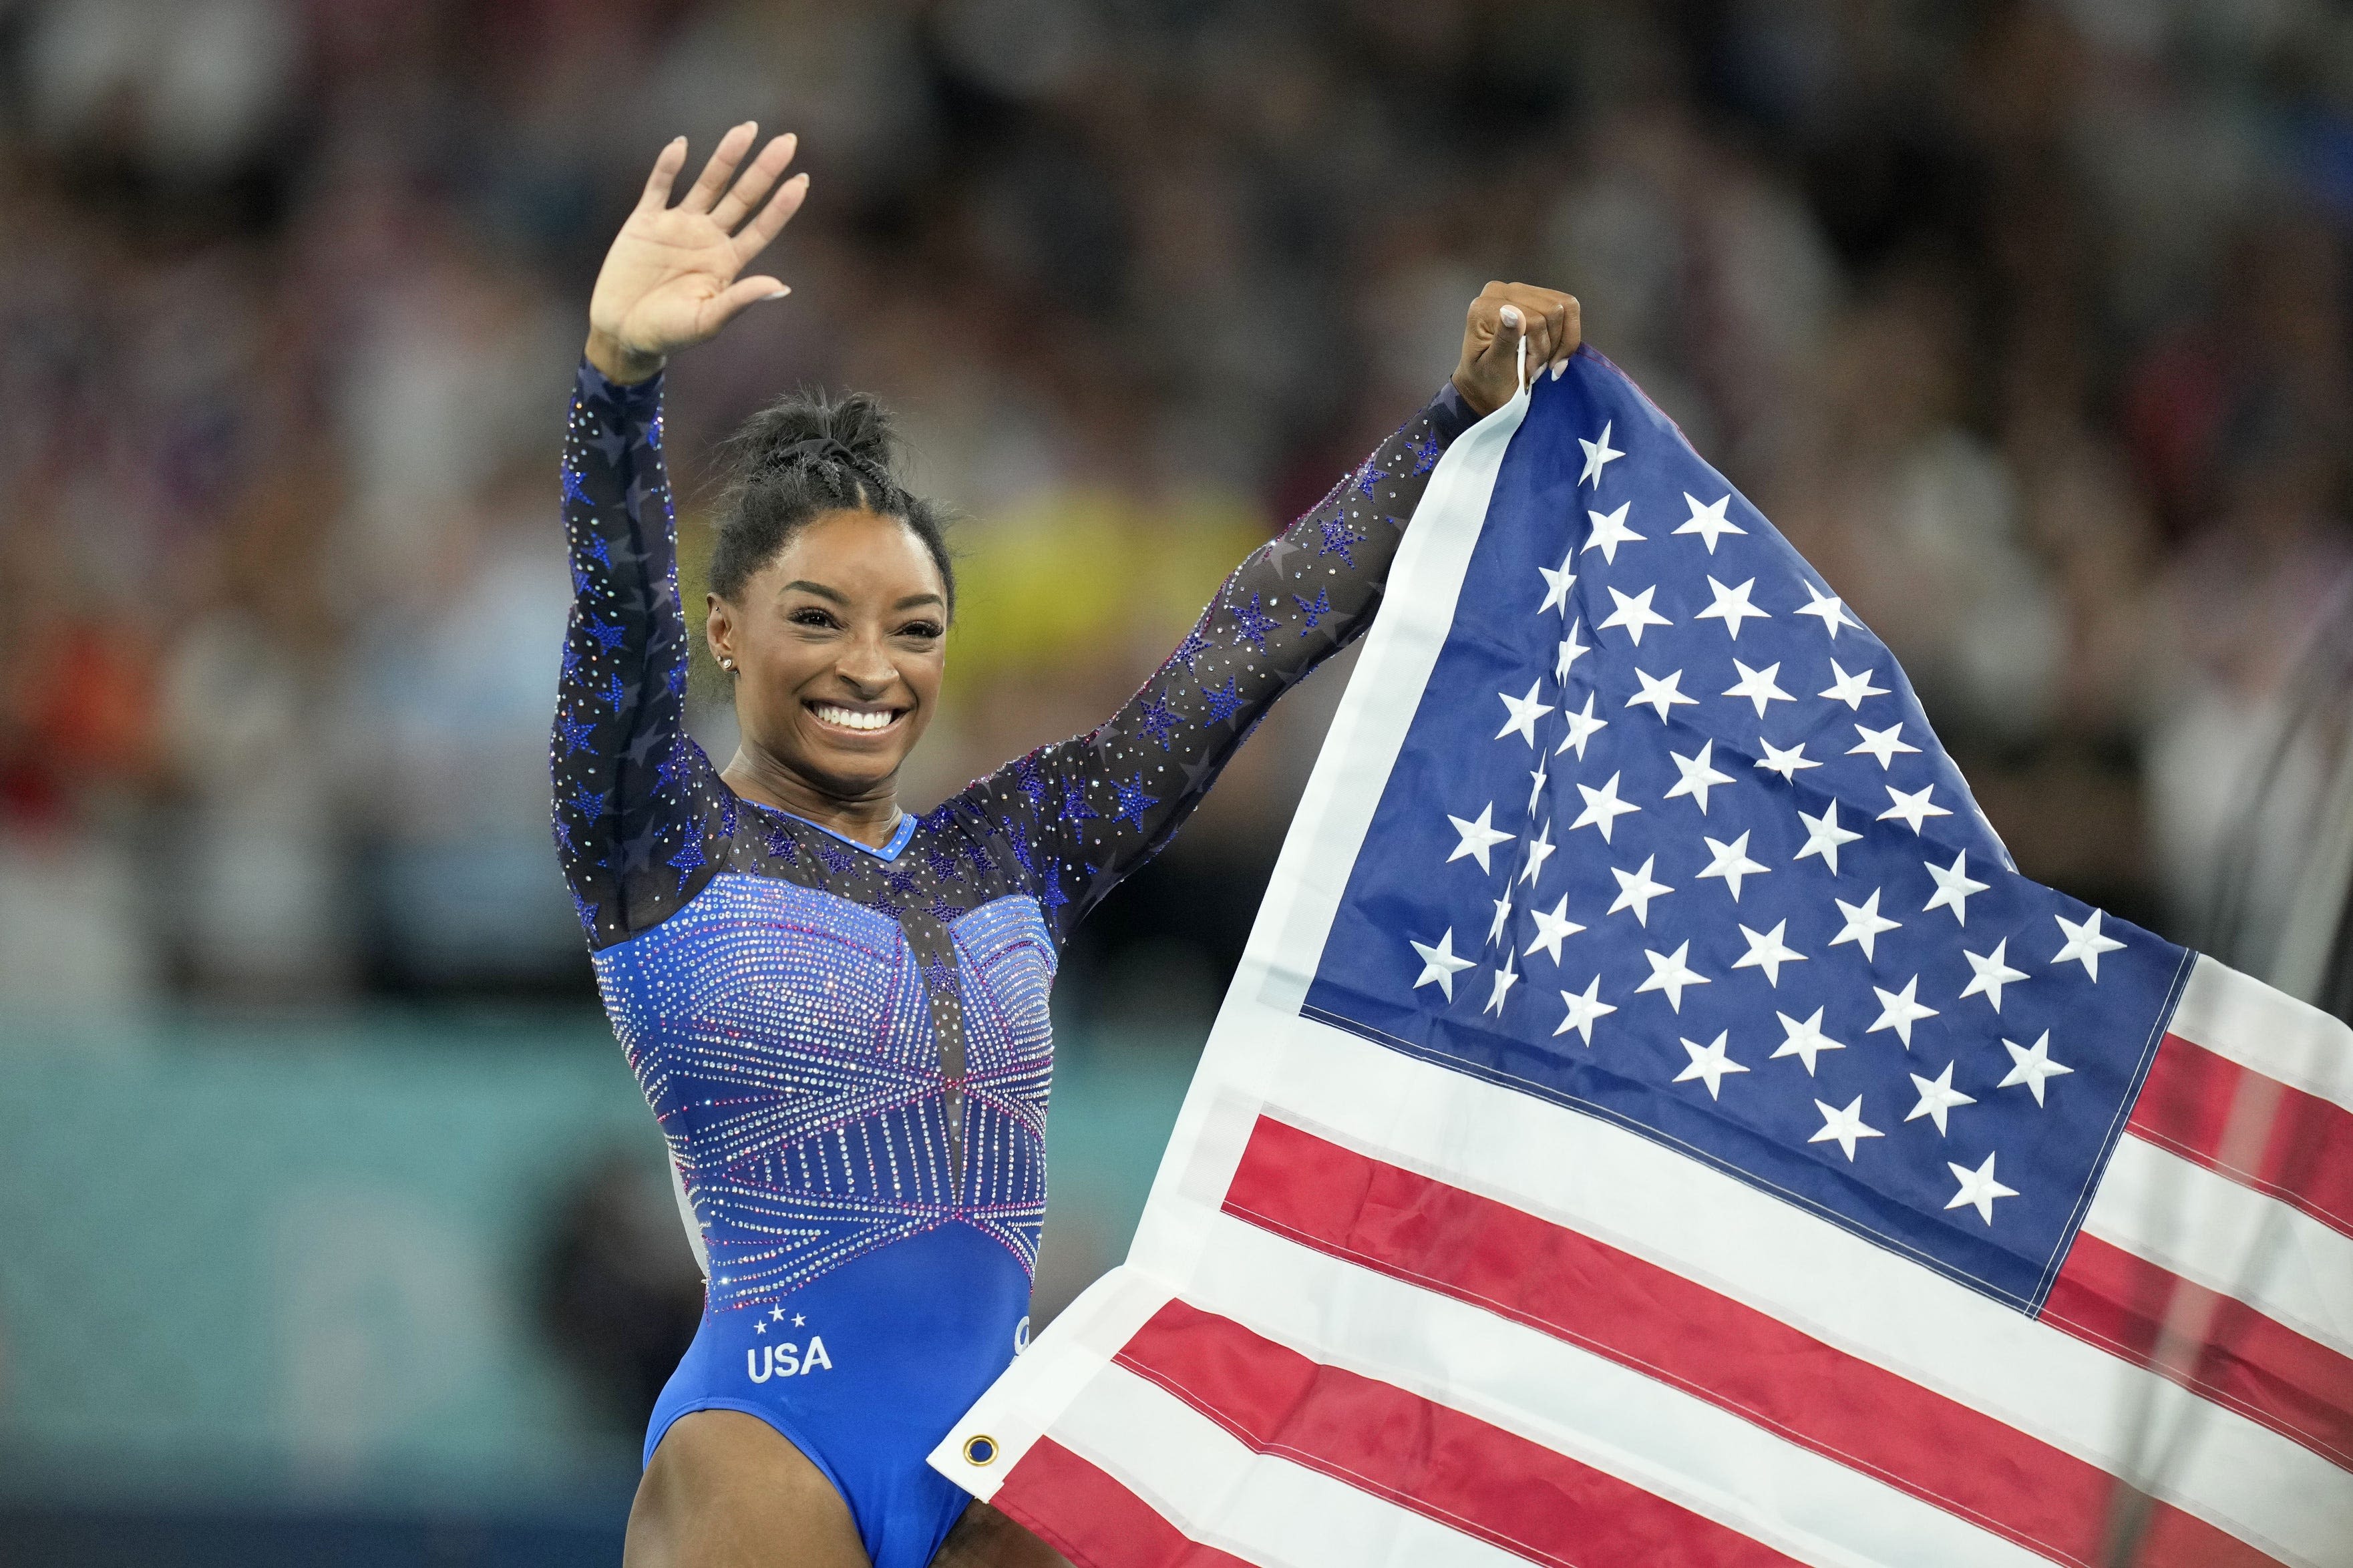 With this Olympic gold, Simone Biles has now surpassed all the other GOATs